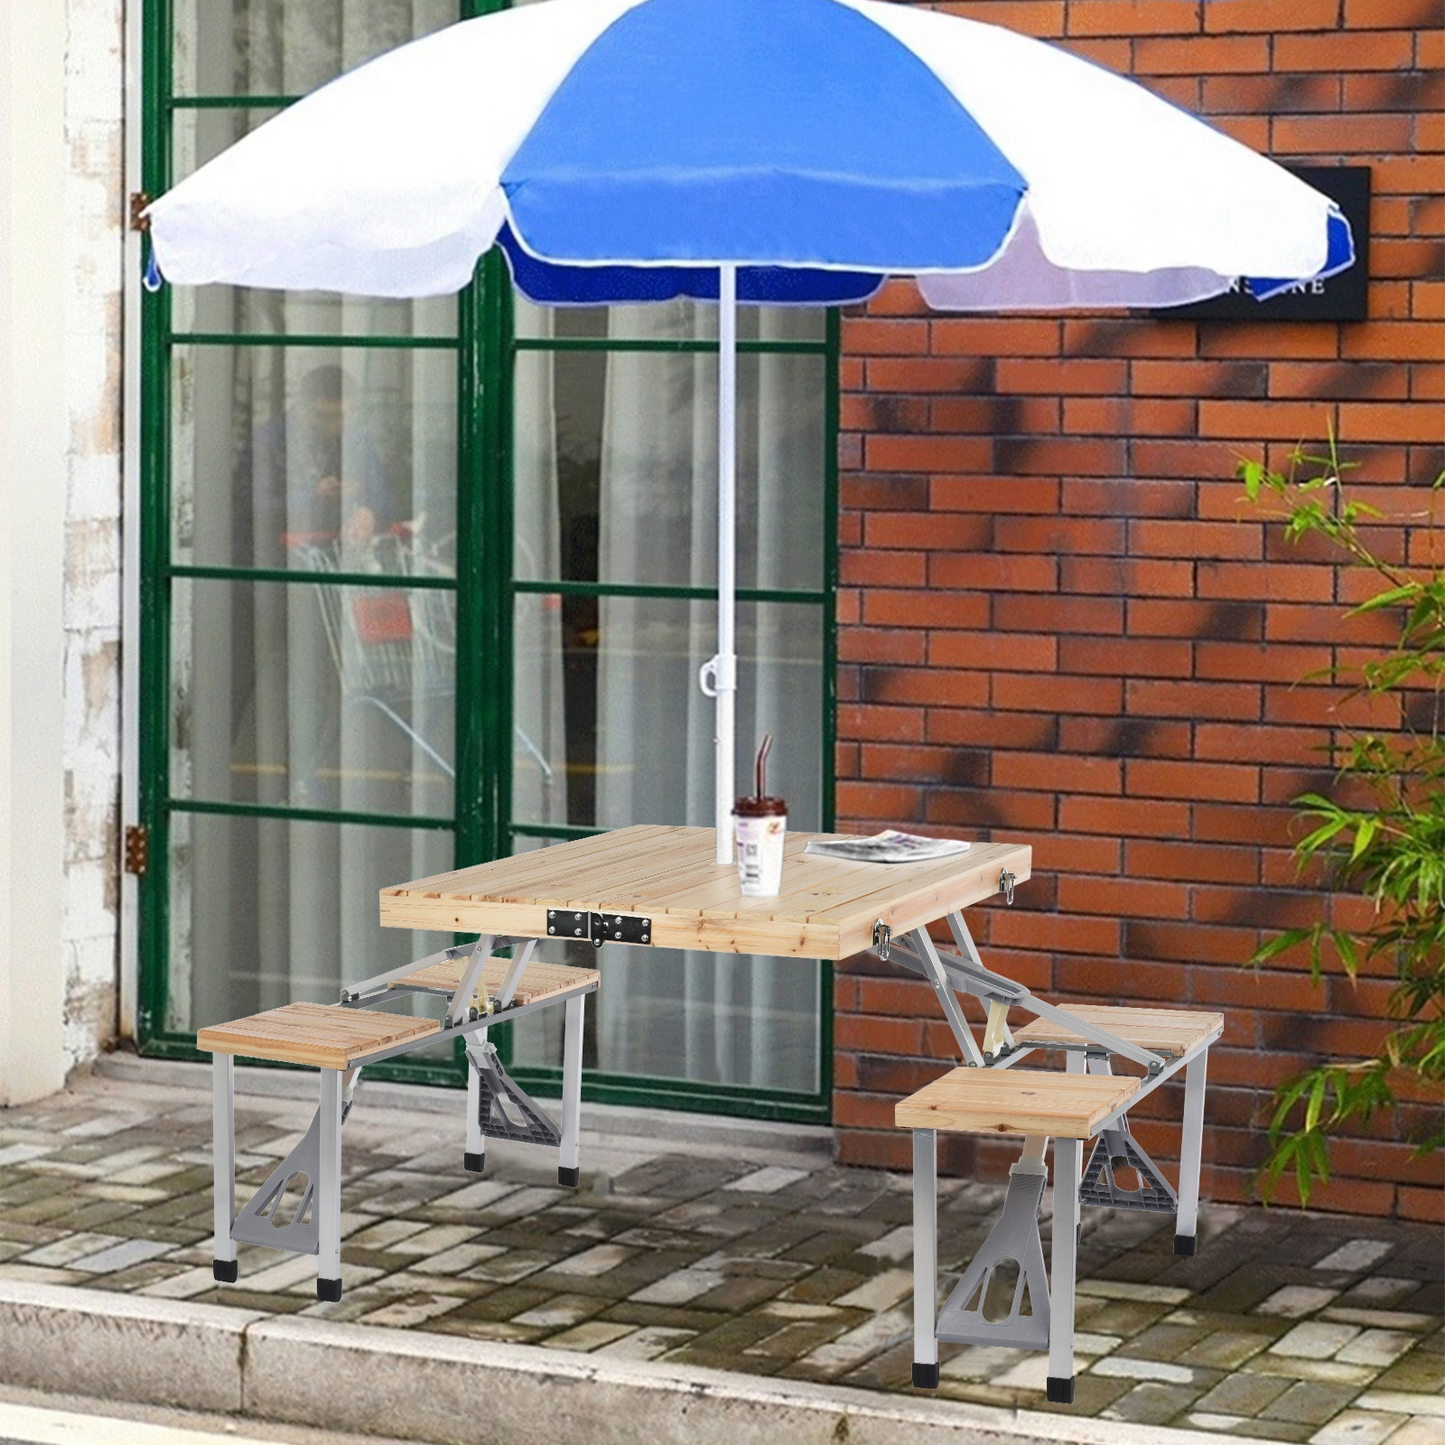 Portable Foldable Camping  Table With Seats Chairs And Umbrella Hole